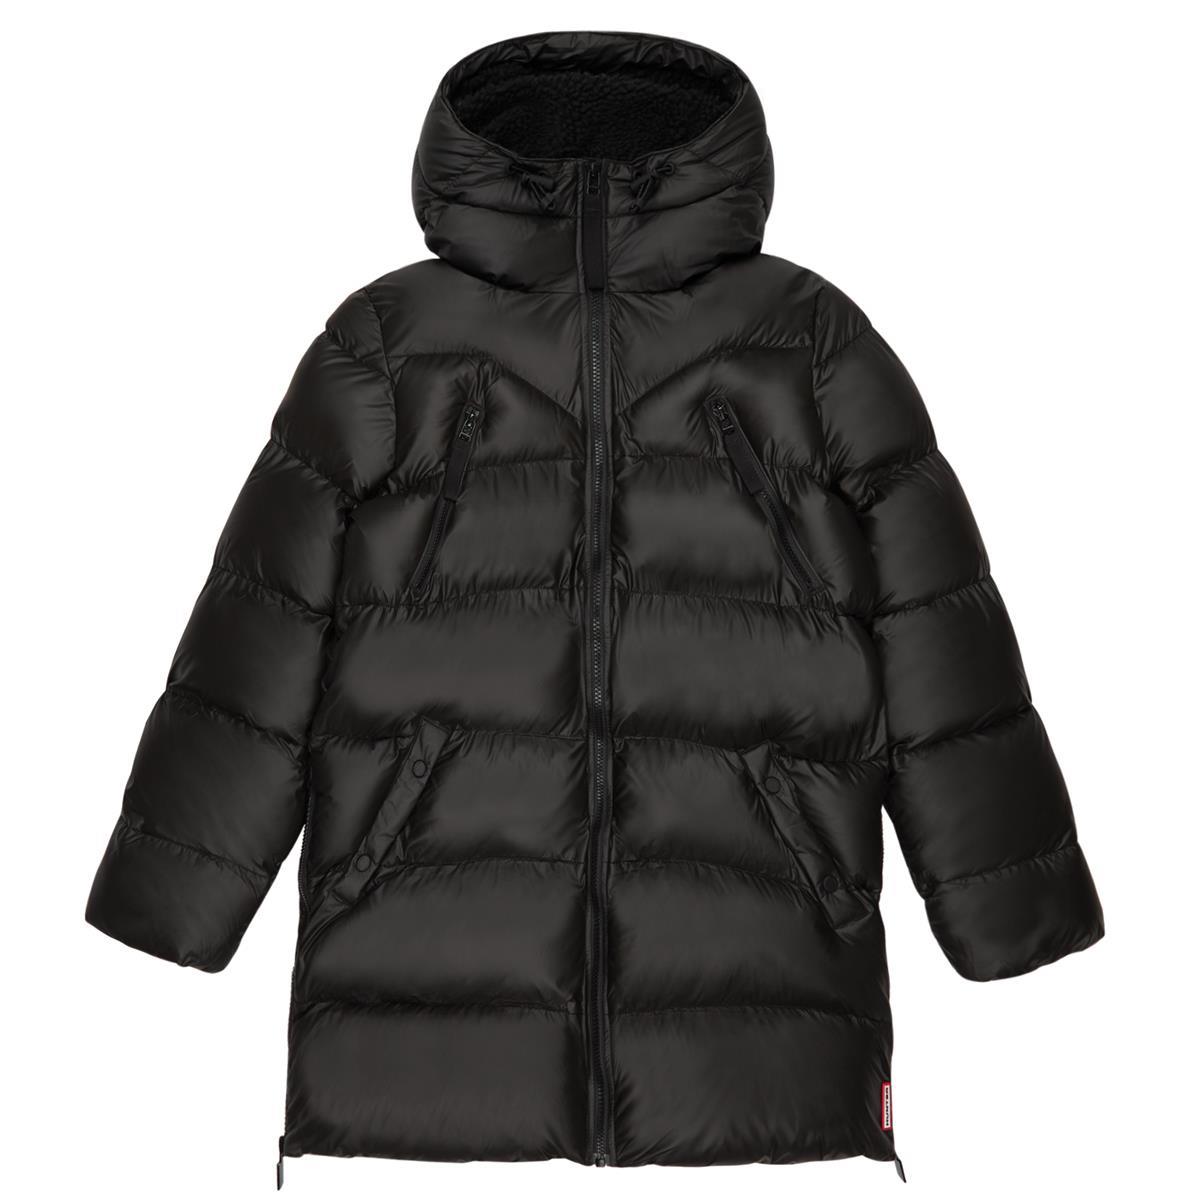 What are the specs of the Hunter Puffer Jacket?